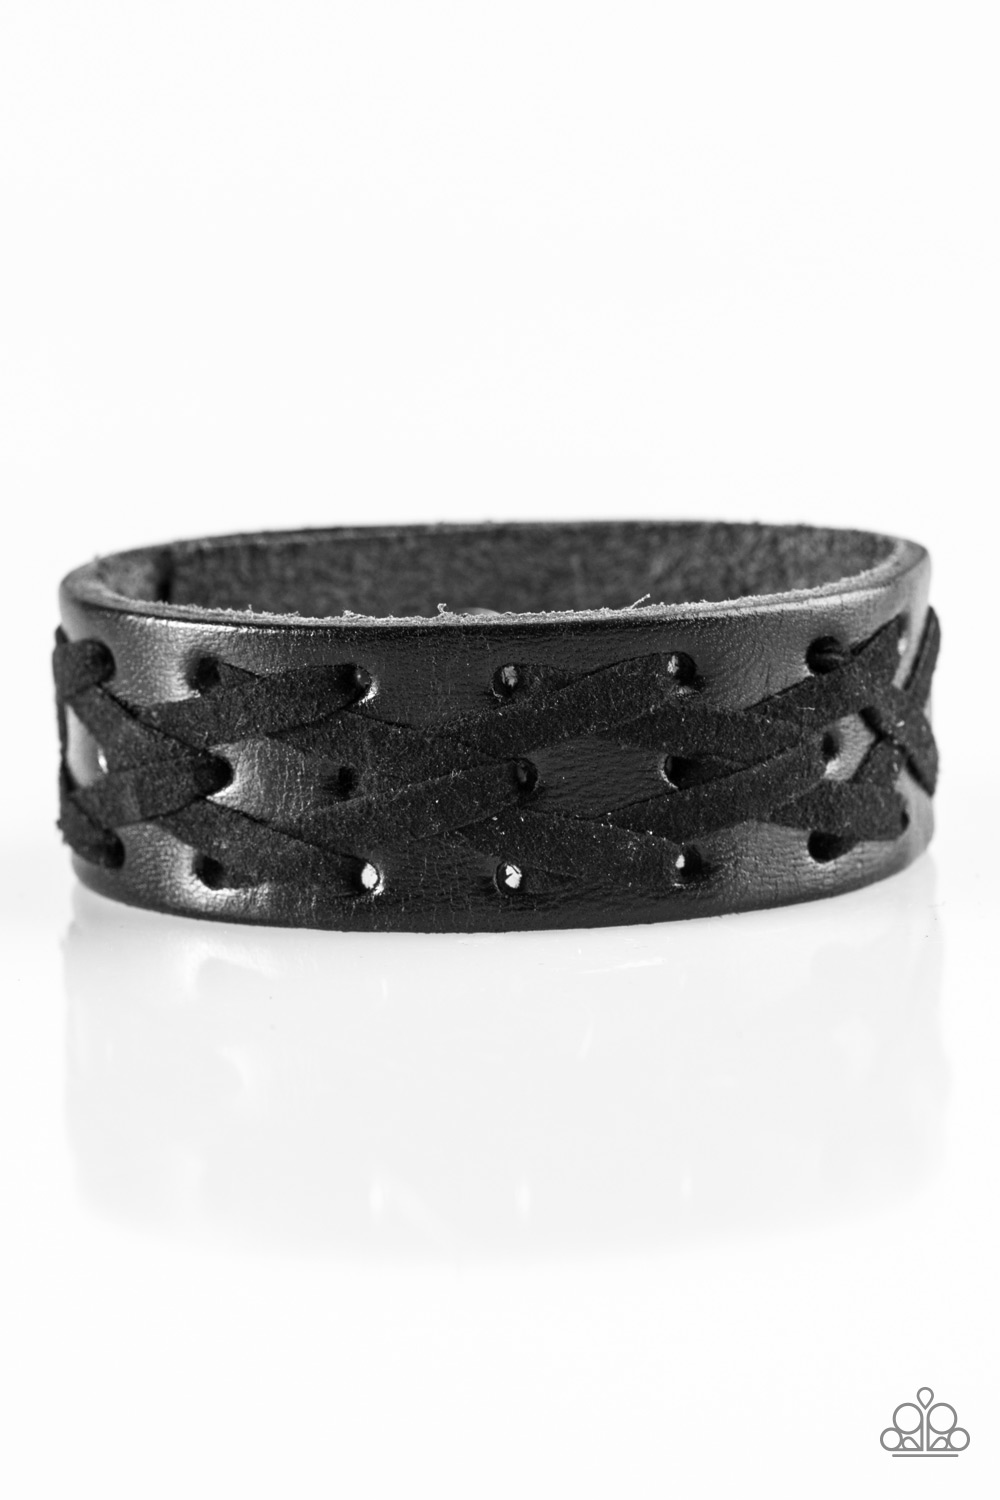 Paparazzi Accessories: Banded Together - Black